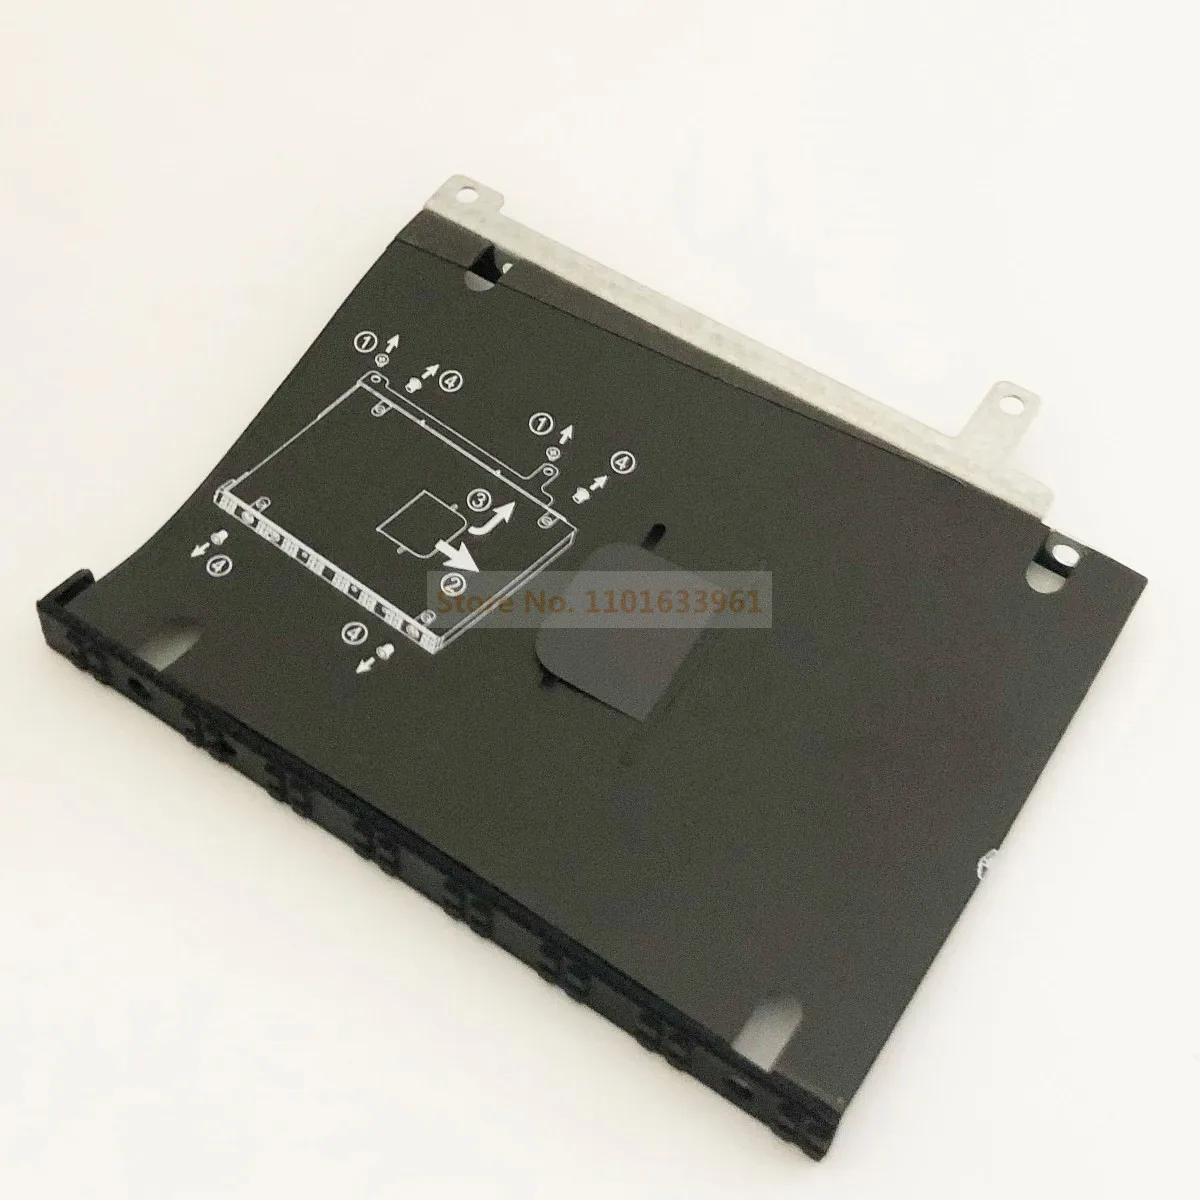 2.5 Inch HDD SSD SATA Hard Disk Drive Caddy Frame Tray Bracket + Screws for HP ProBook 455 450 470 475 G5 images - 6